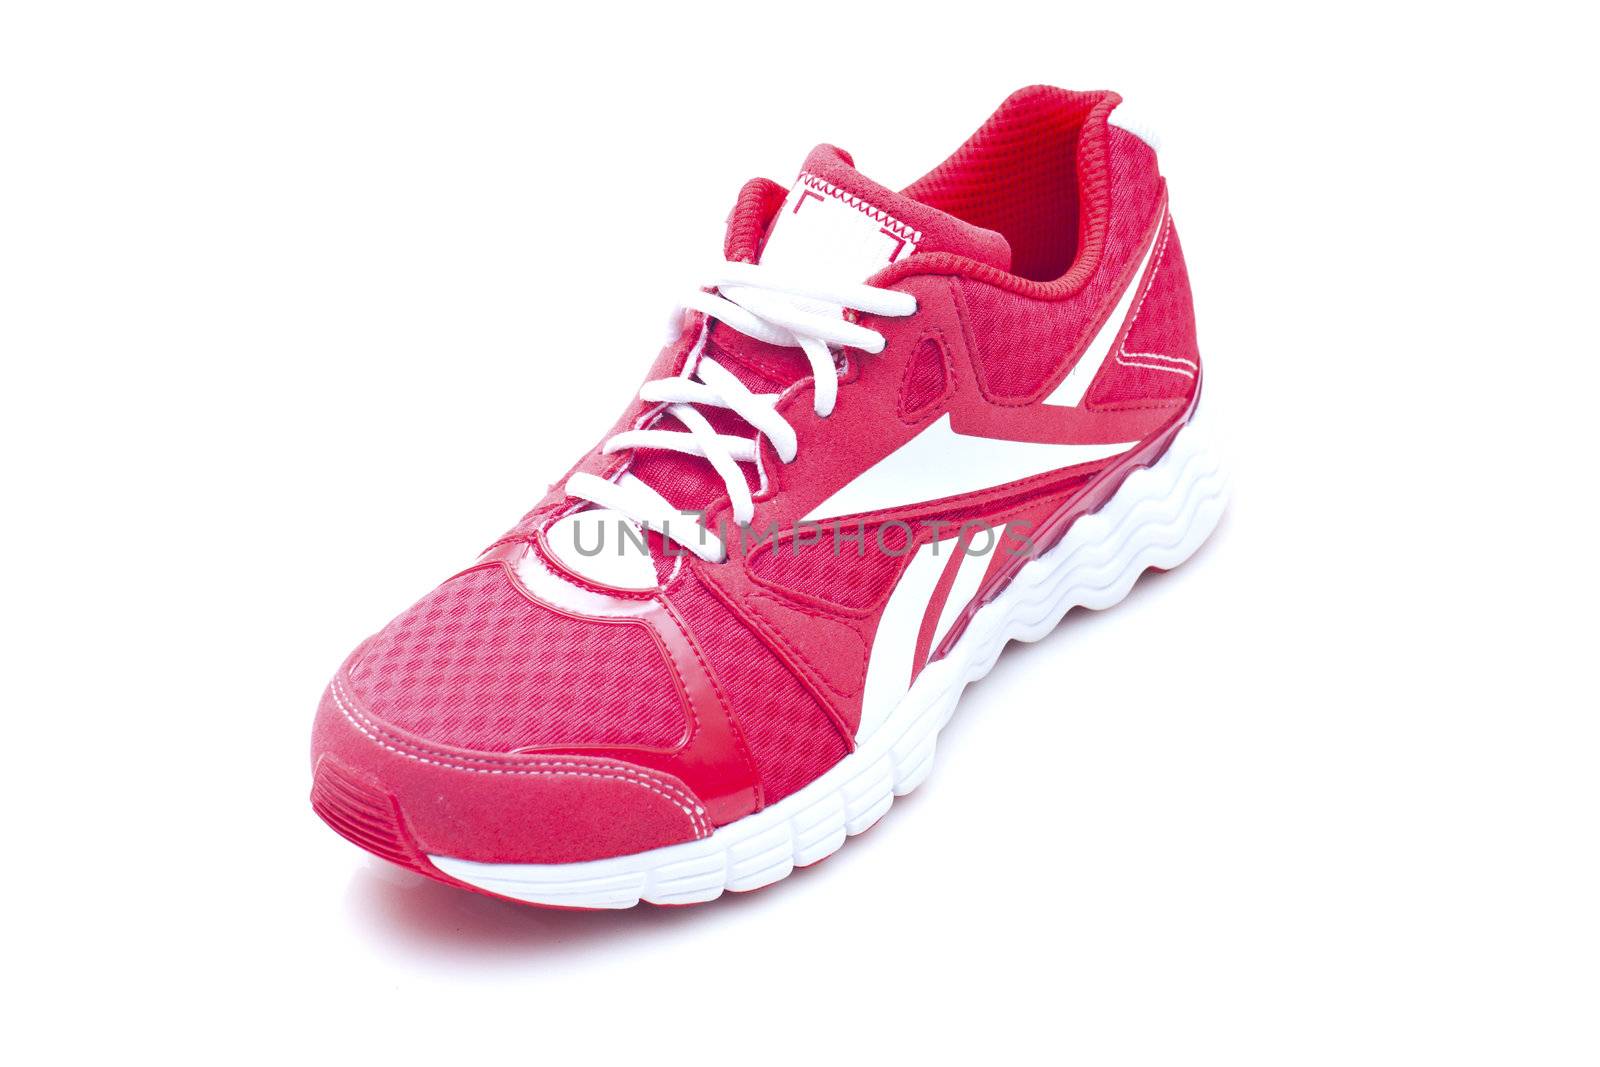 Red running sports shoes by kawing921